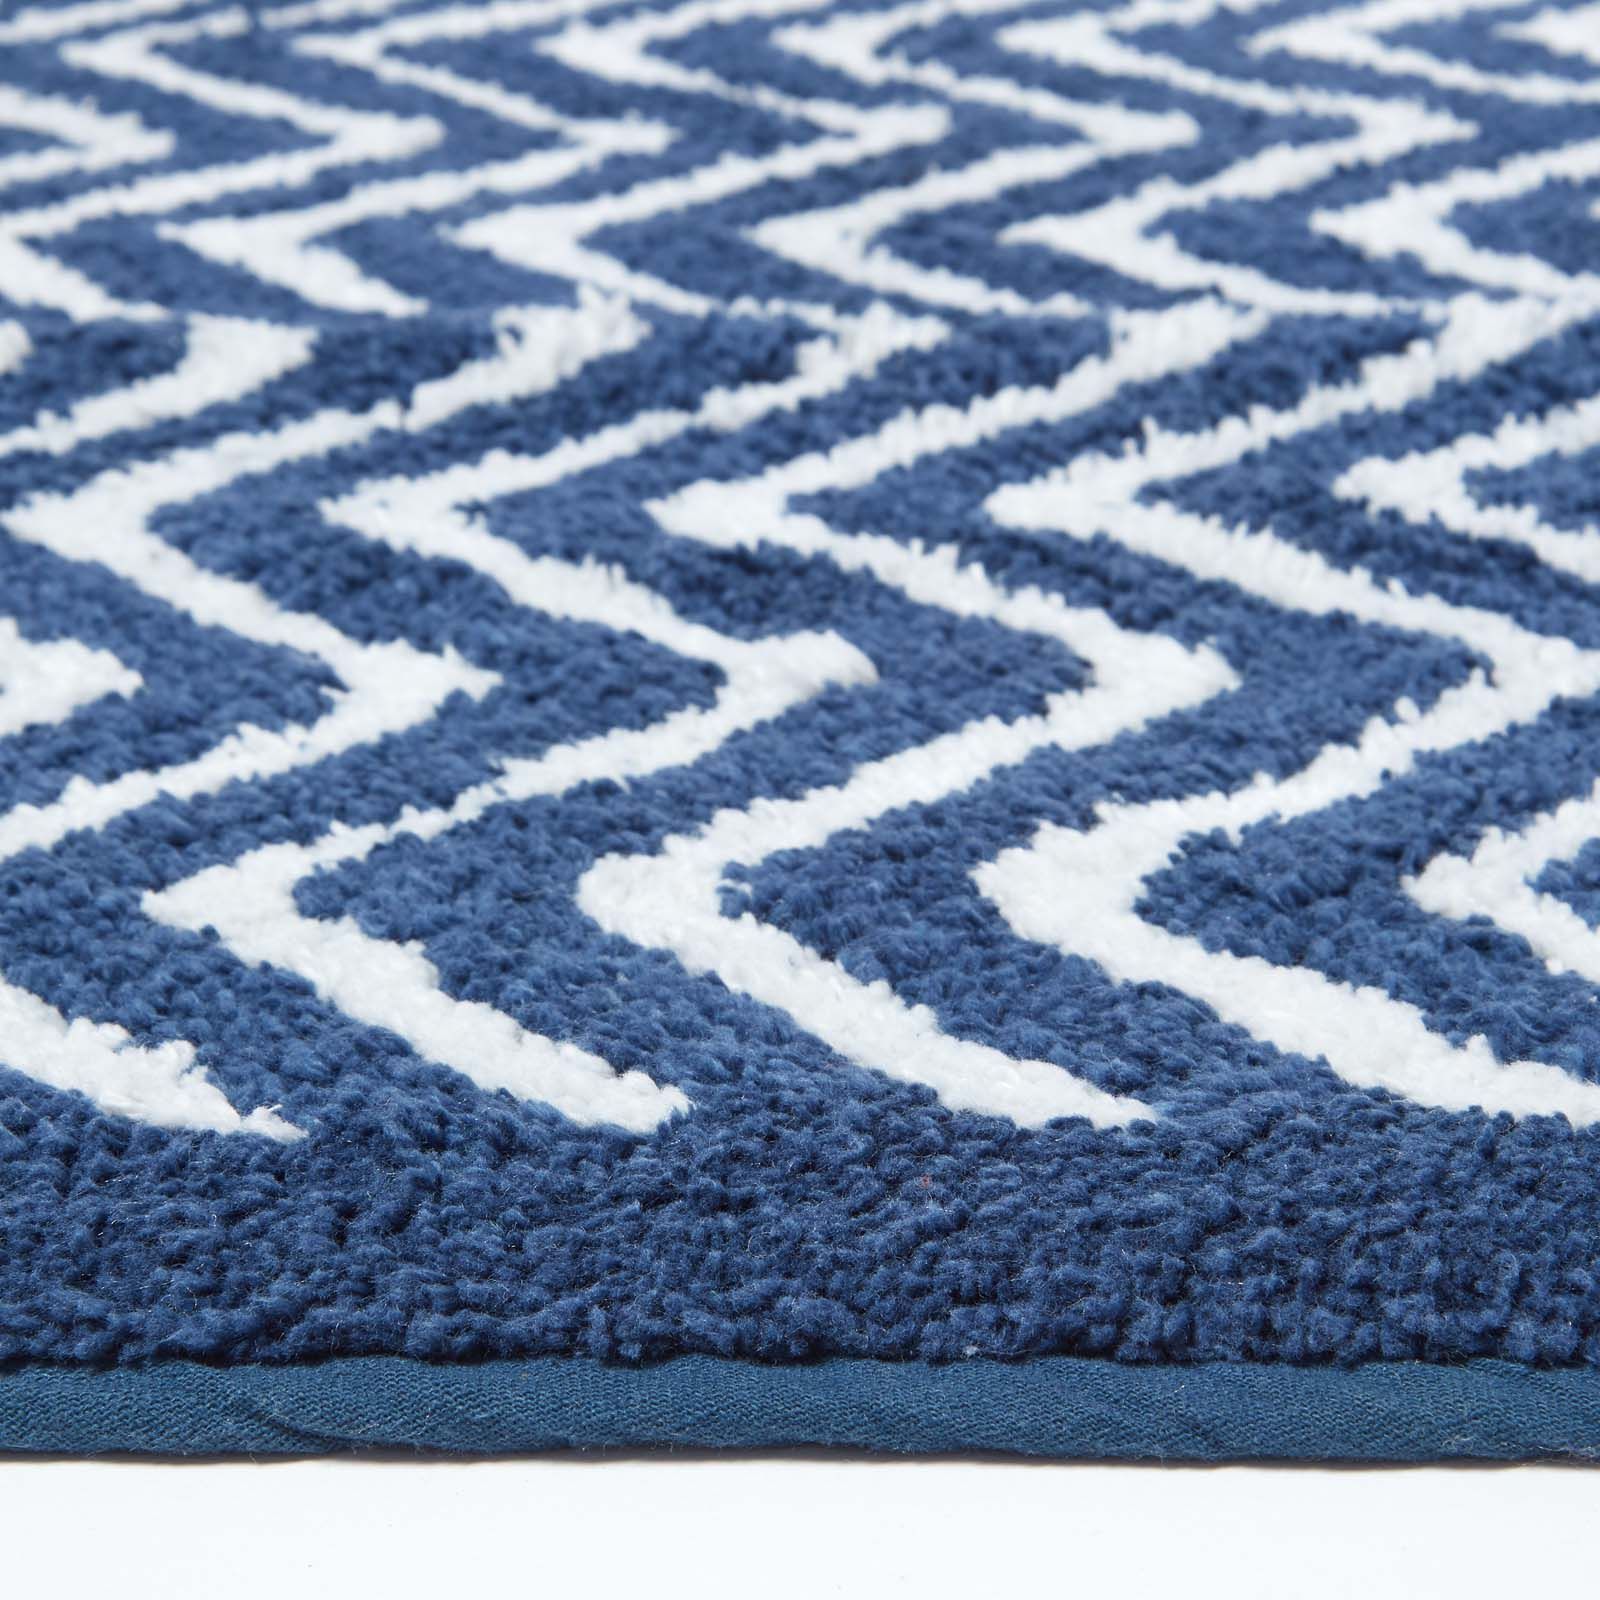 Chevron Ripple Zig Zag Navy Blue and White Nautical Anchor Non-Slip Bathroom Doormat Runner Rugs Toilet Seat Cover OneHoney 3-Piece Bath Rug and Mat Sets U-Shaped Toilet Floor Mat